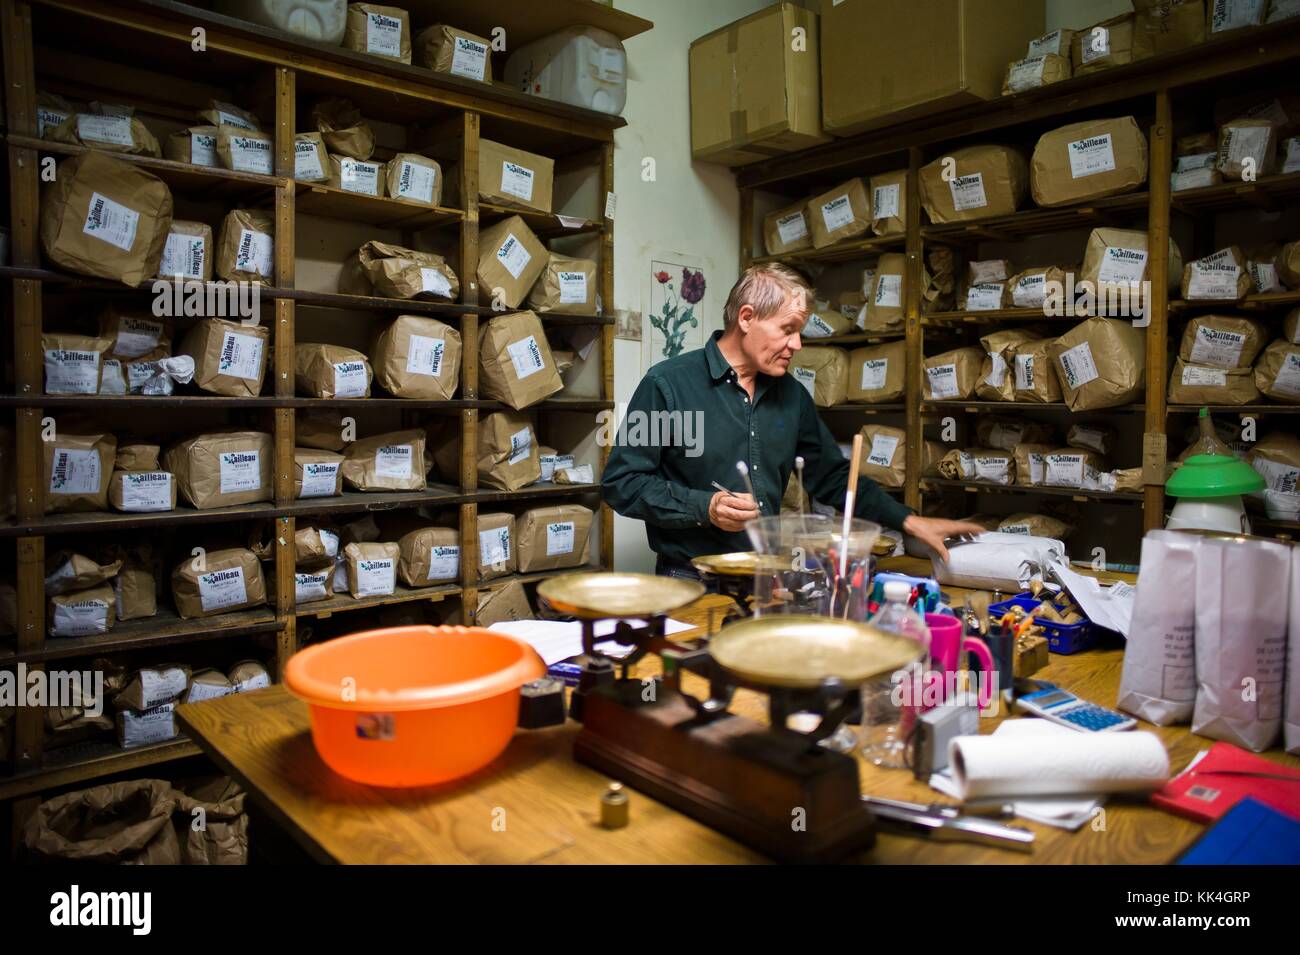 the traditional herbal medicine in danger  -  26/09/2011  -  France / Ile-de-France (region) / Paris  -  the traditional herbal medicine in danger  -  Portrait of Jean-Pierre Raveneau, Biologist and Doctor of Pharmacy   -  Sylvain Leser / Le Pictorium Stock Photo